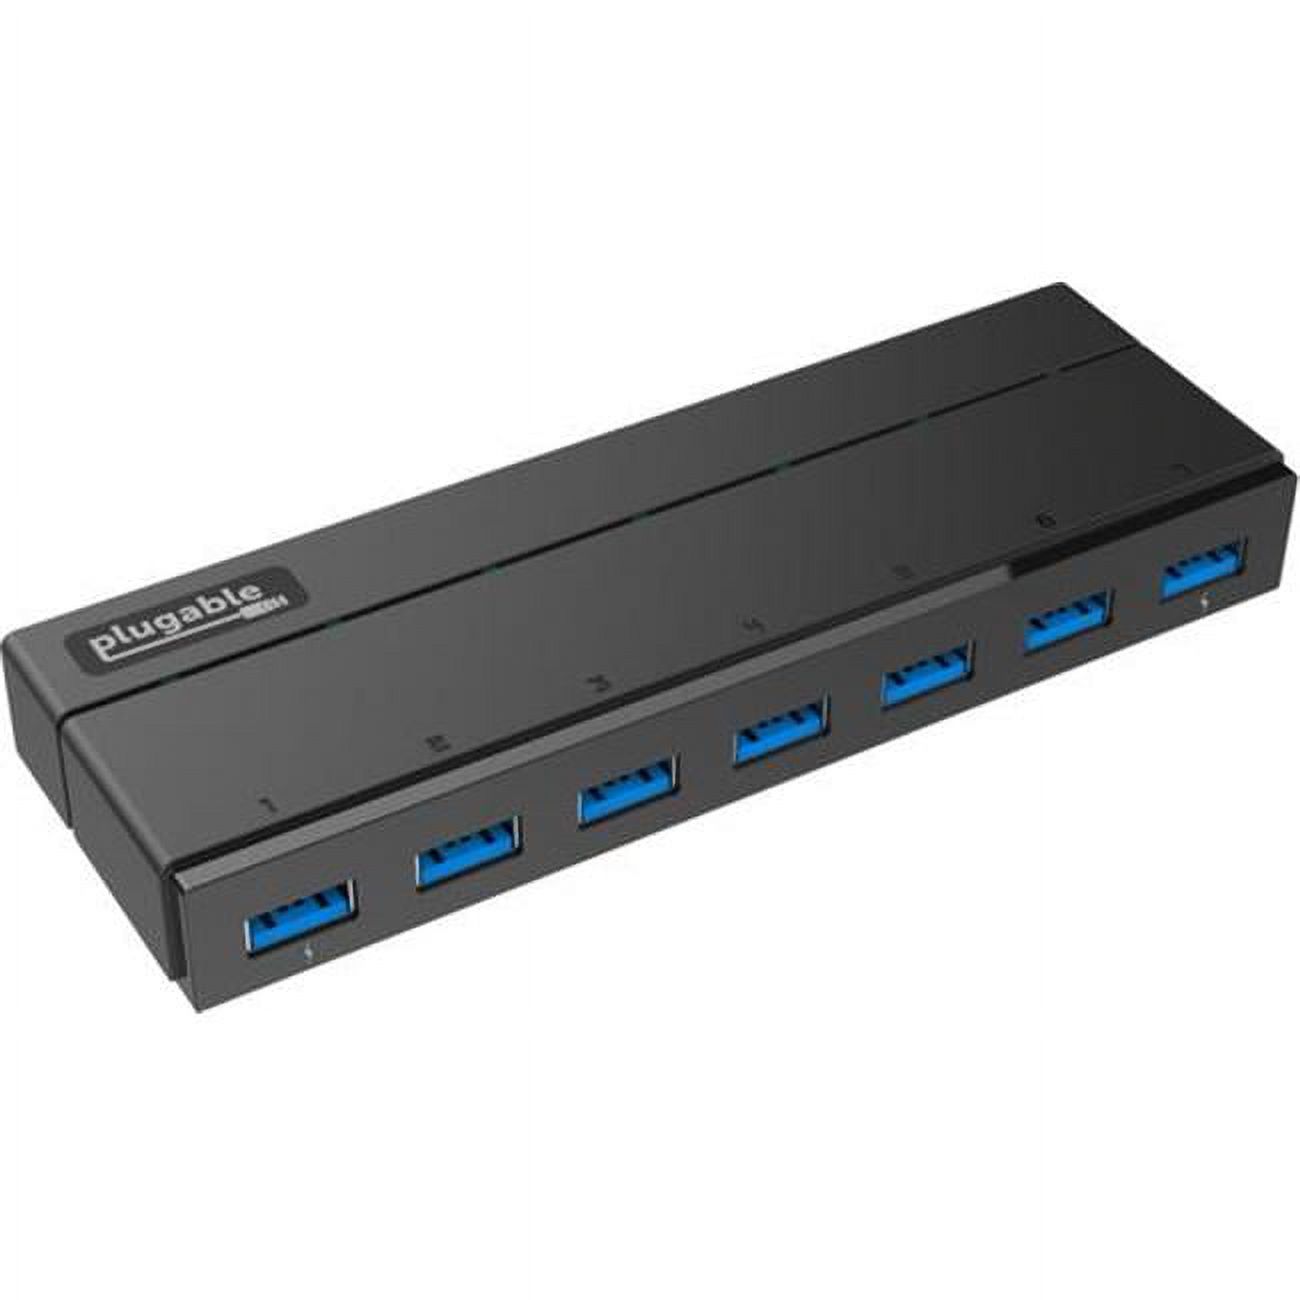 Plugable 7-Port USB 3.0 Hub with 36W Power Adapter - image 1 of 4